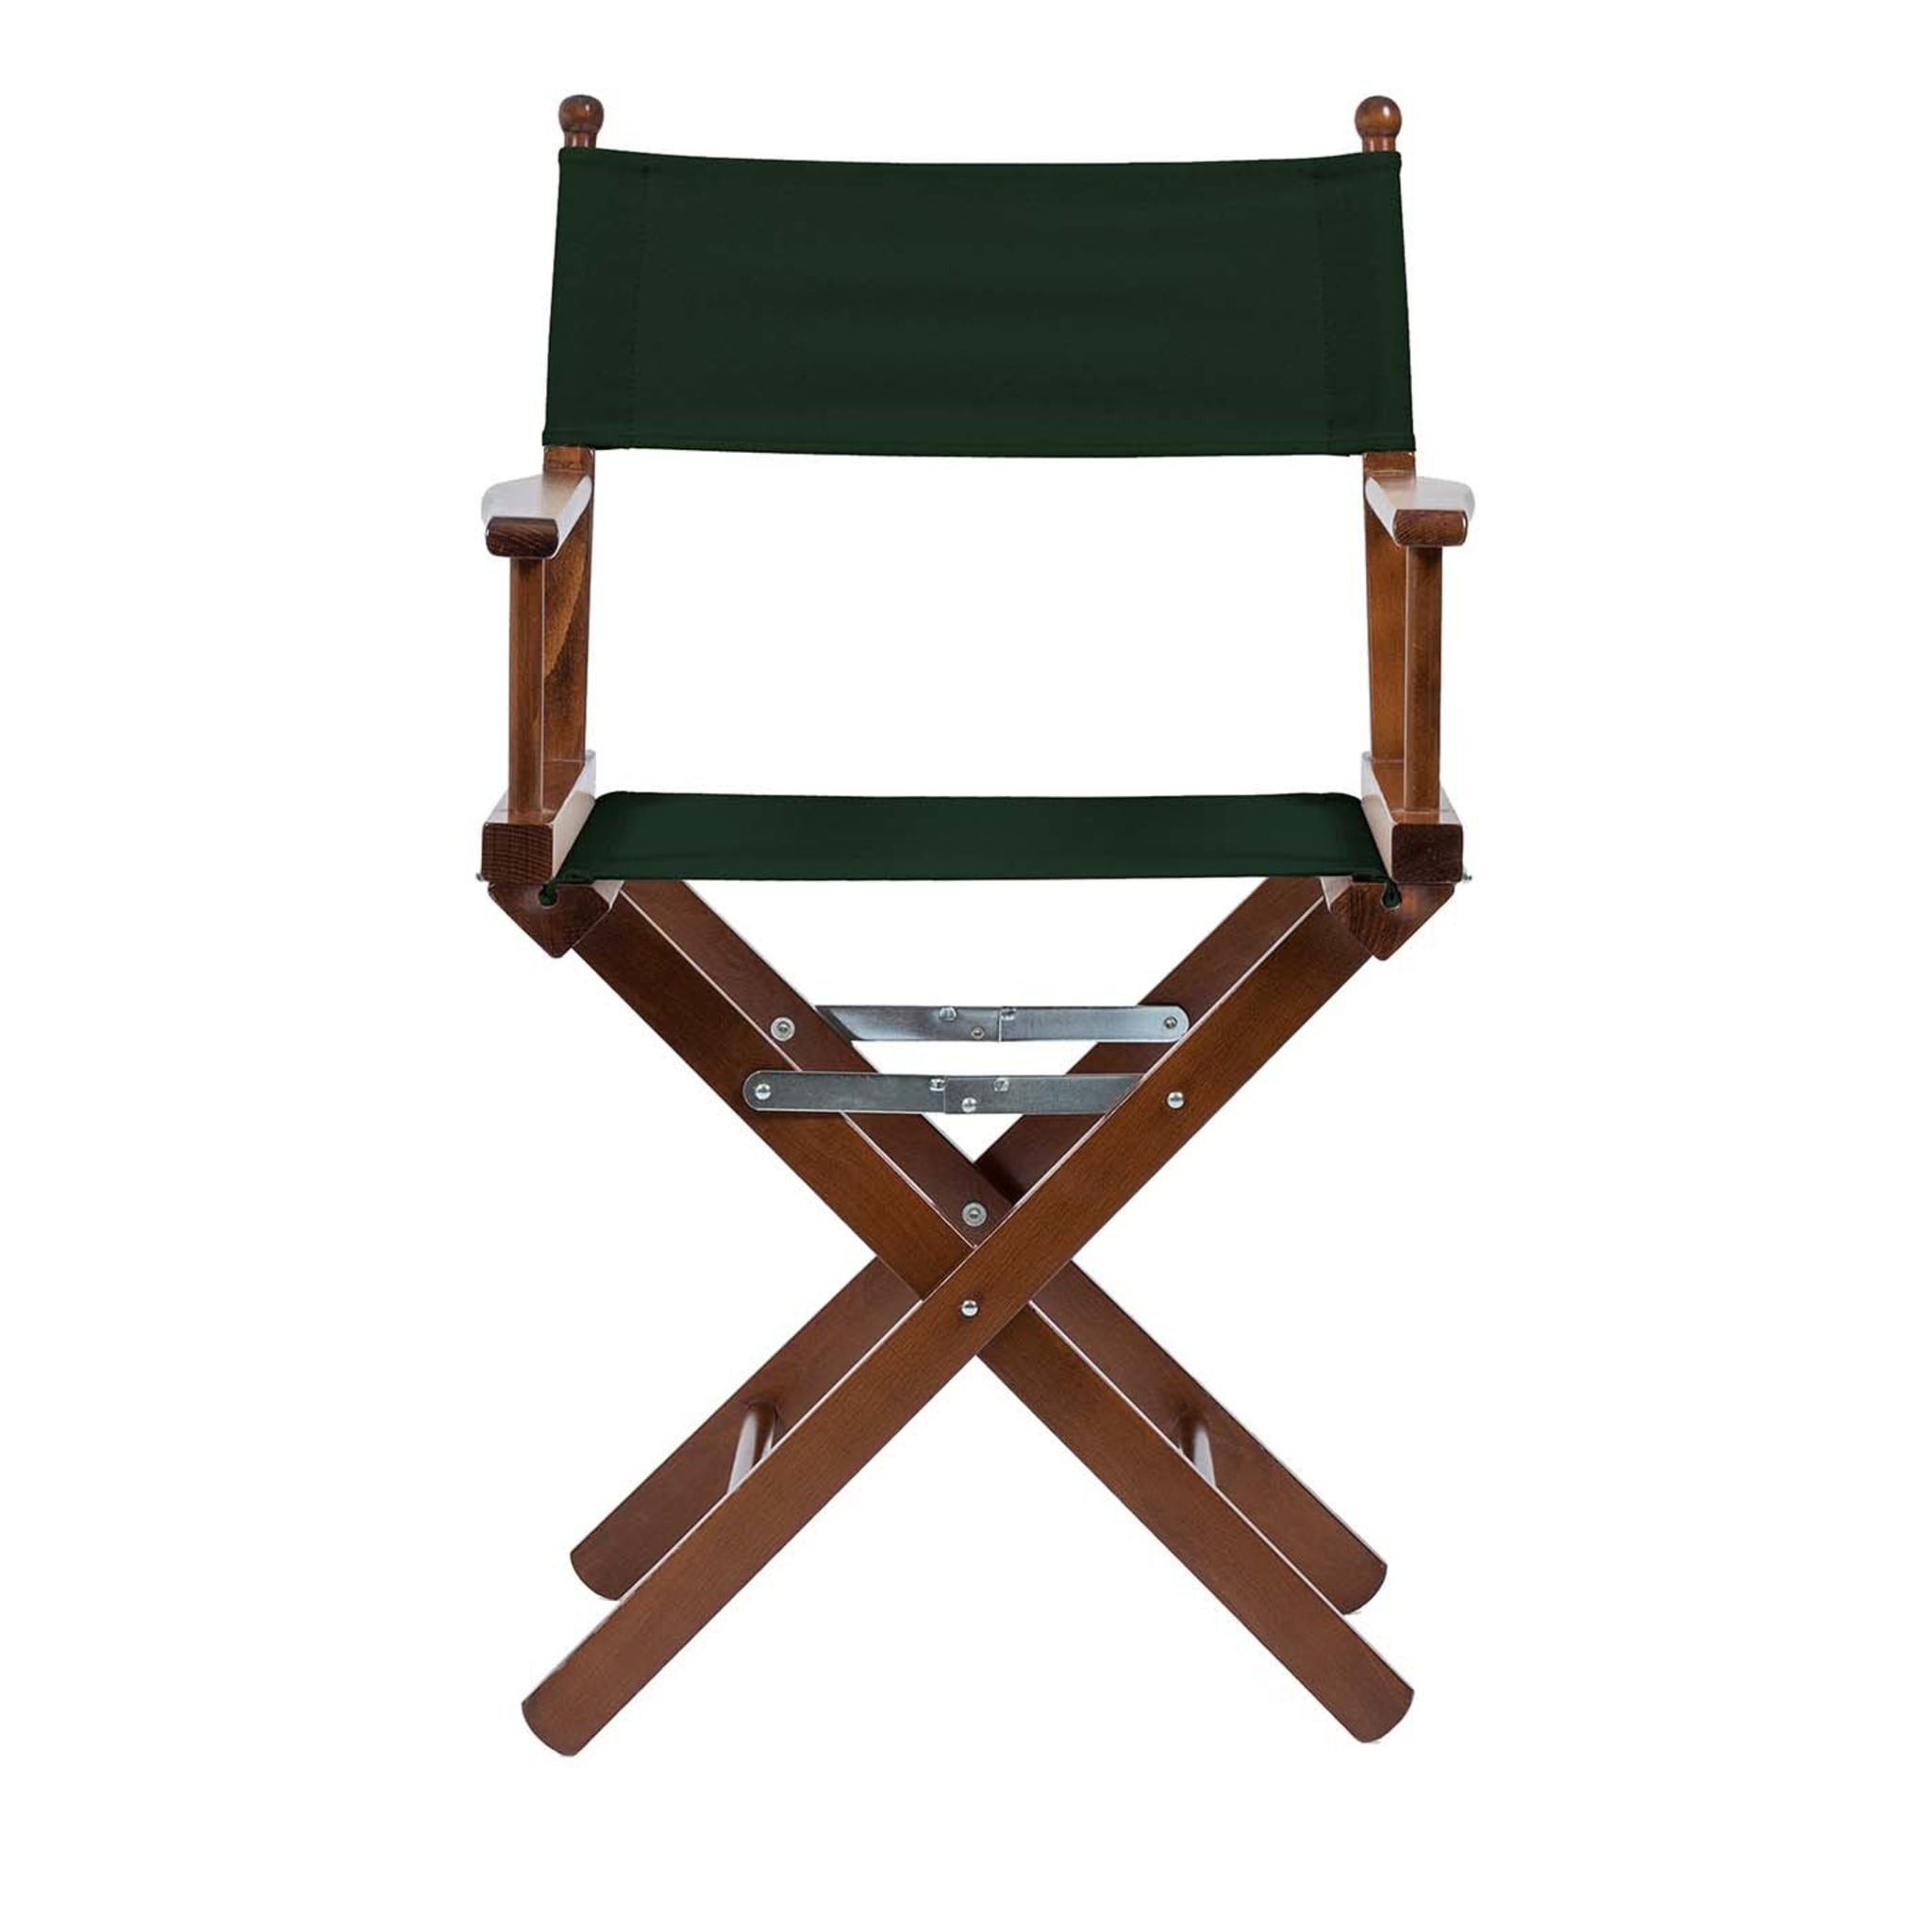 Director's Chair in Forest Green - Main view